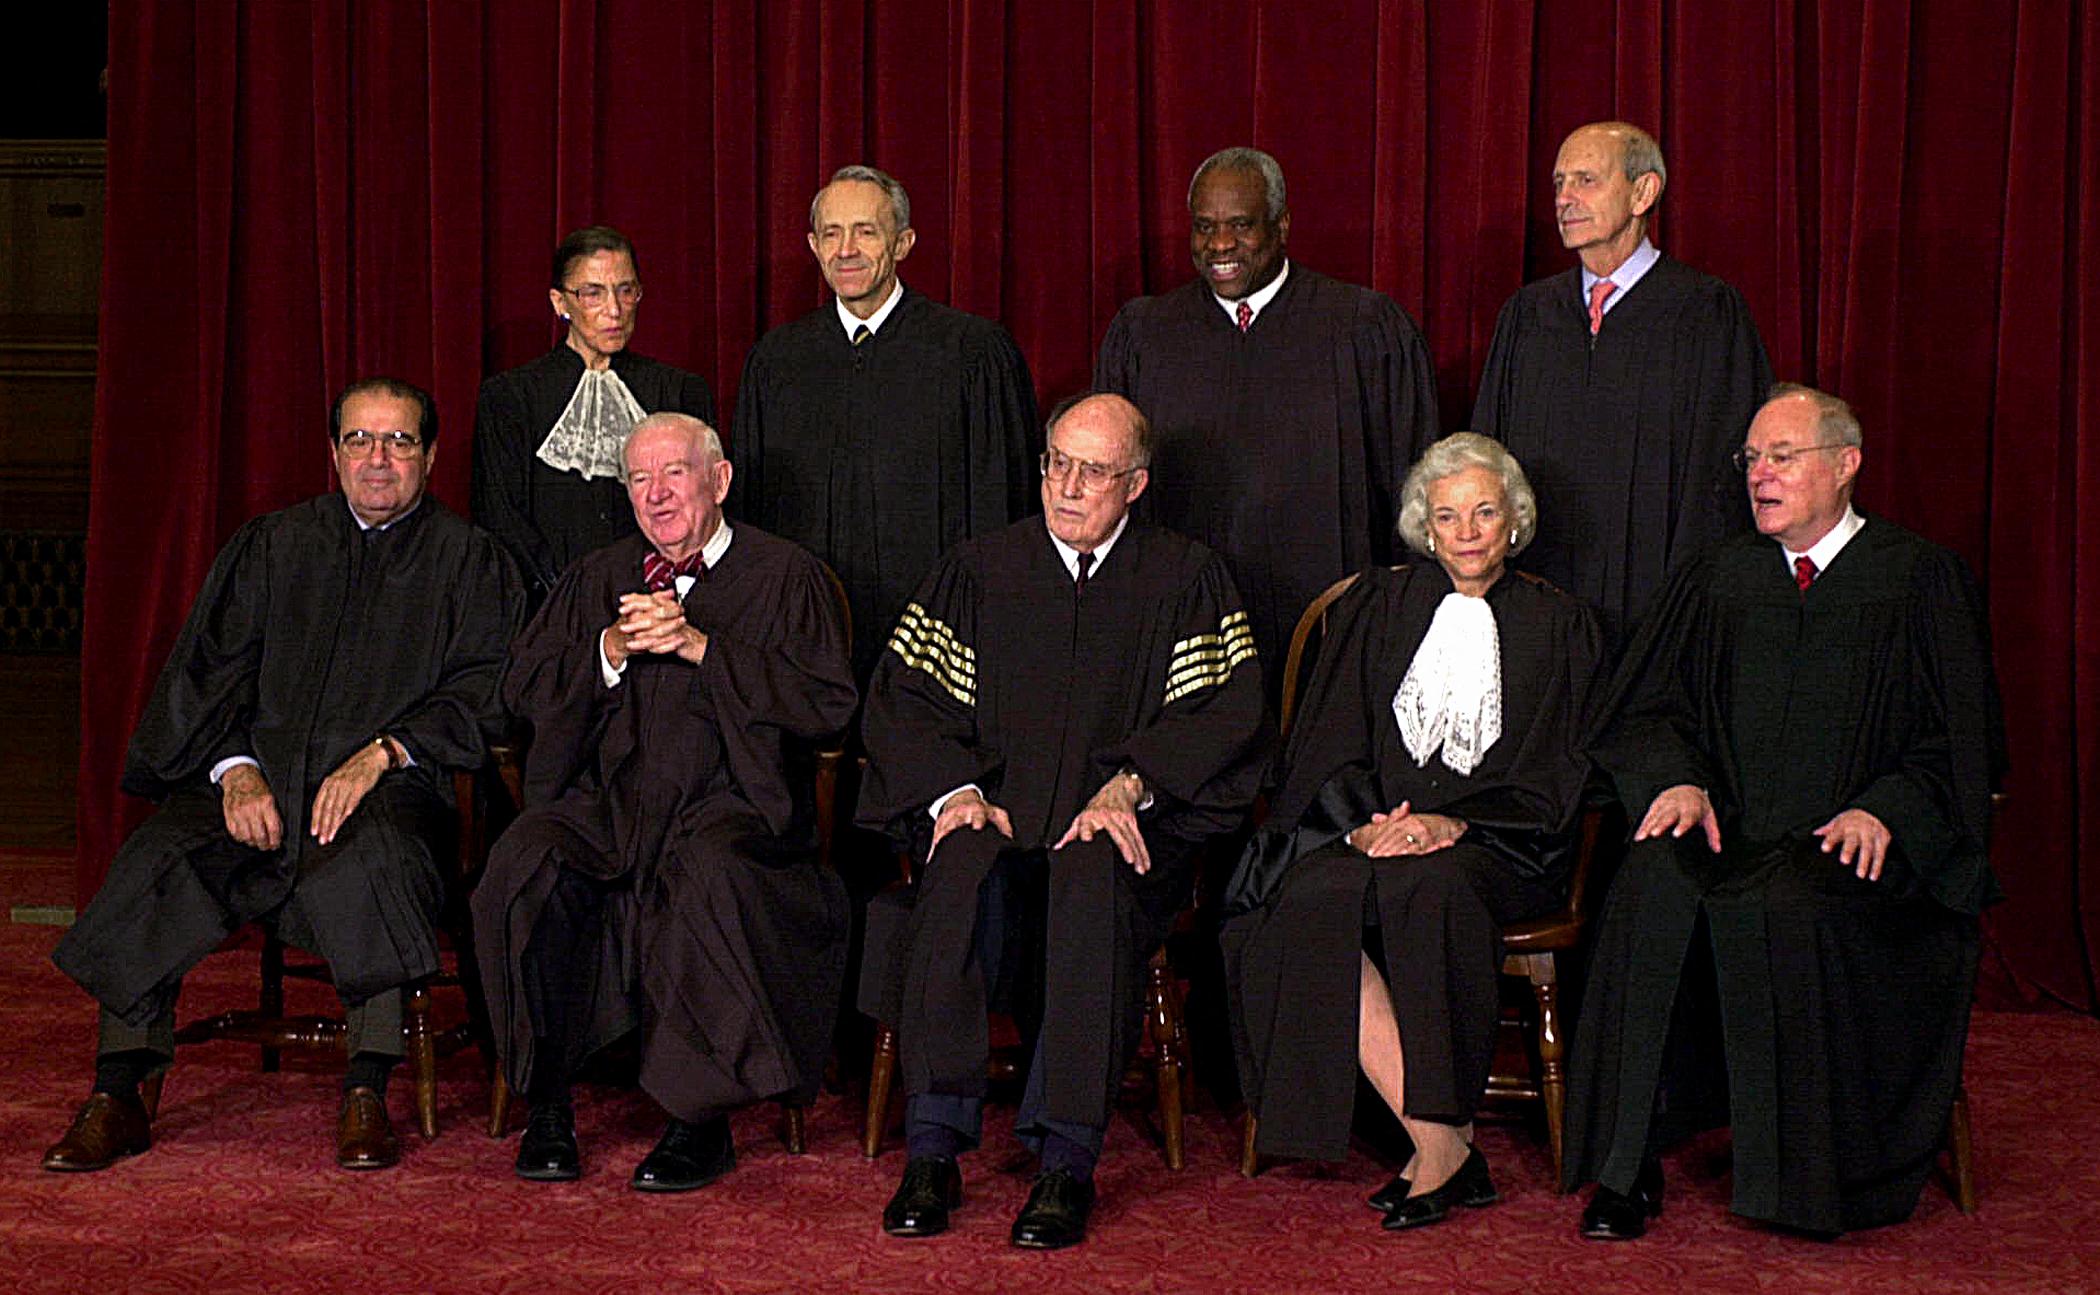 Justices of the Supreme Court of the United States pose for an official photo in December 2003